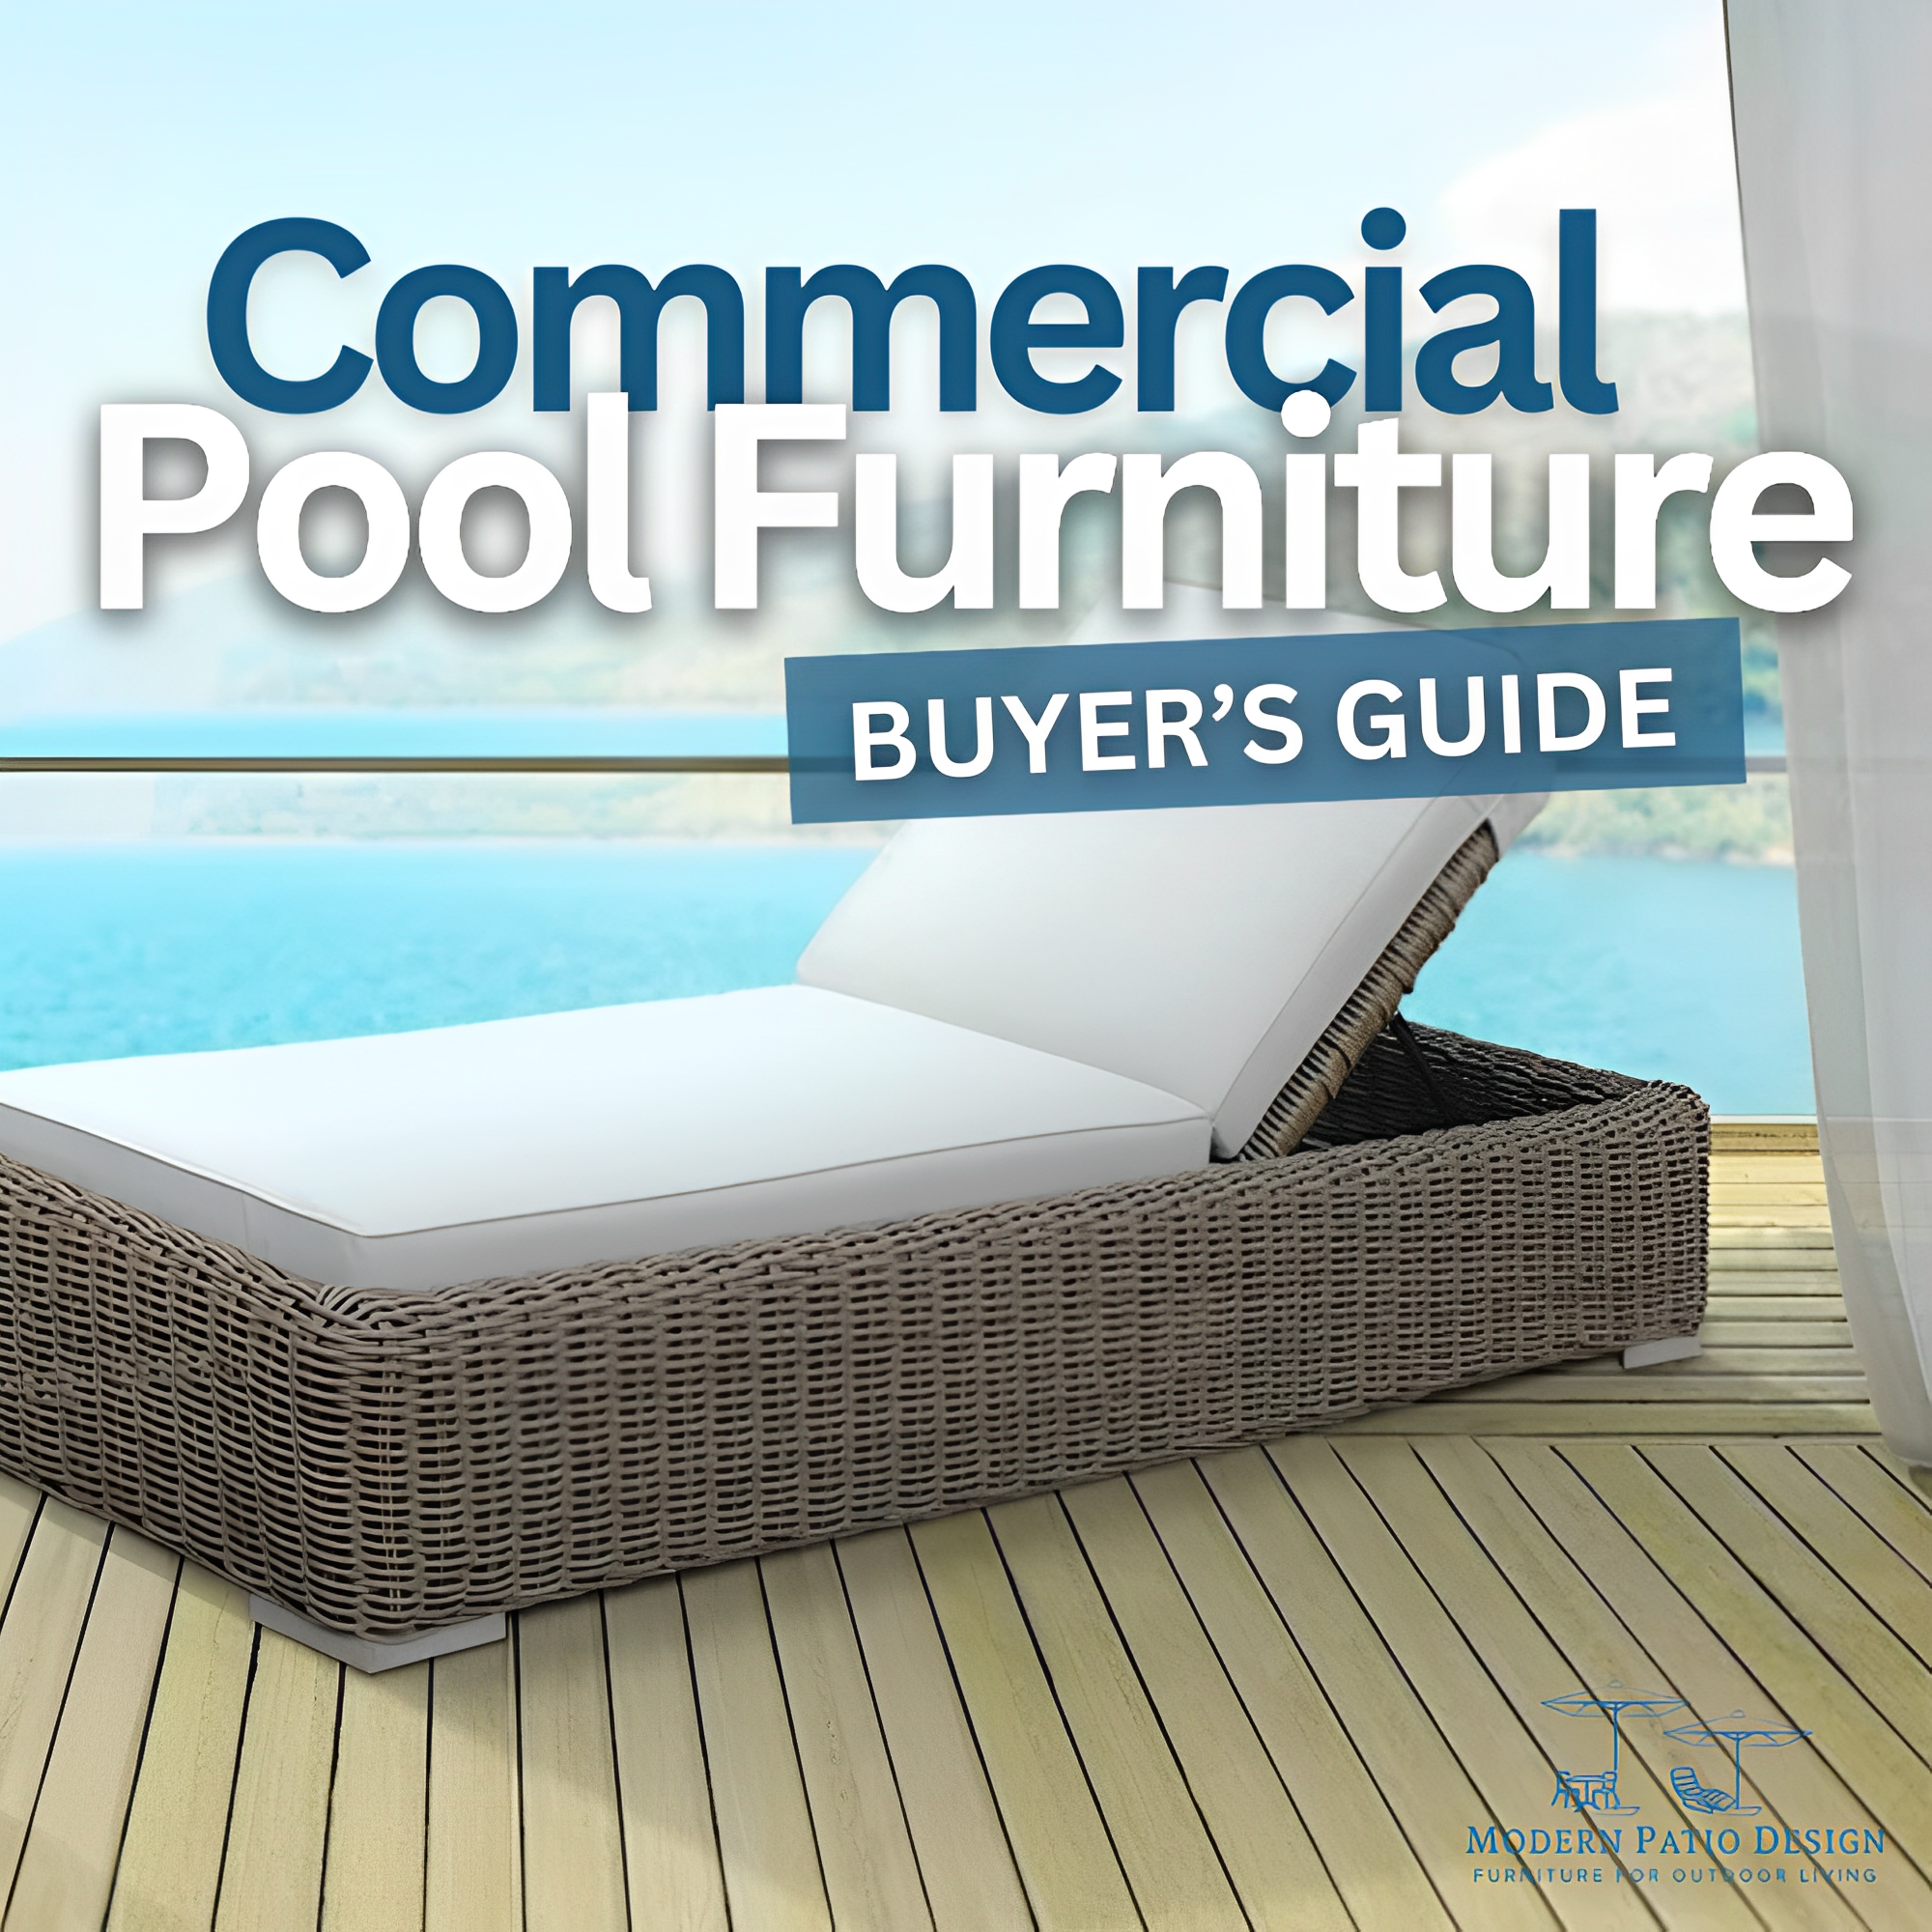 Buyer's Guide to Commercial Pool Furniture